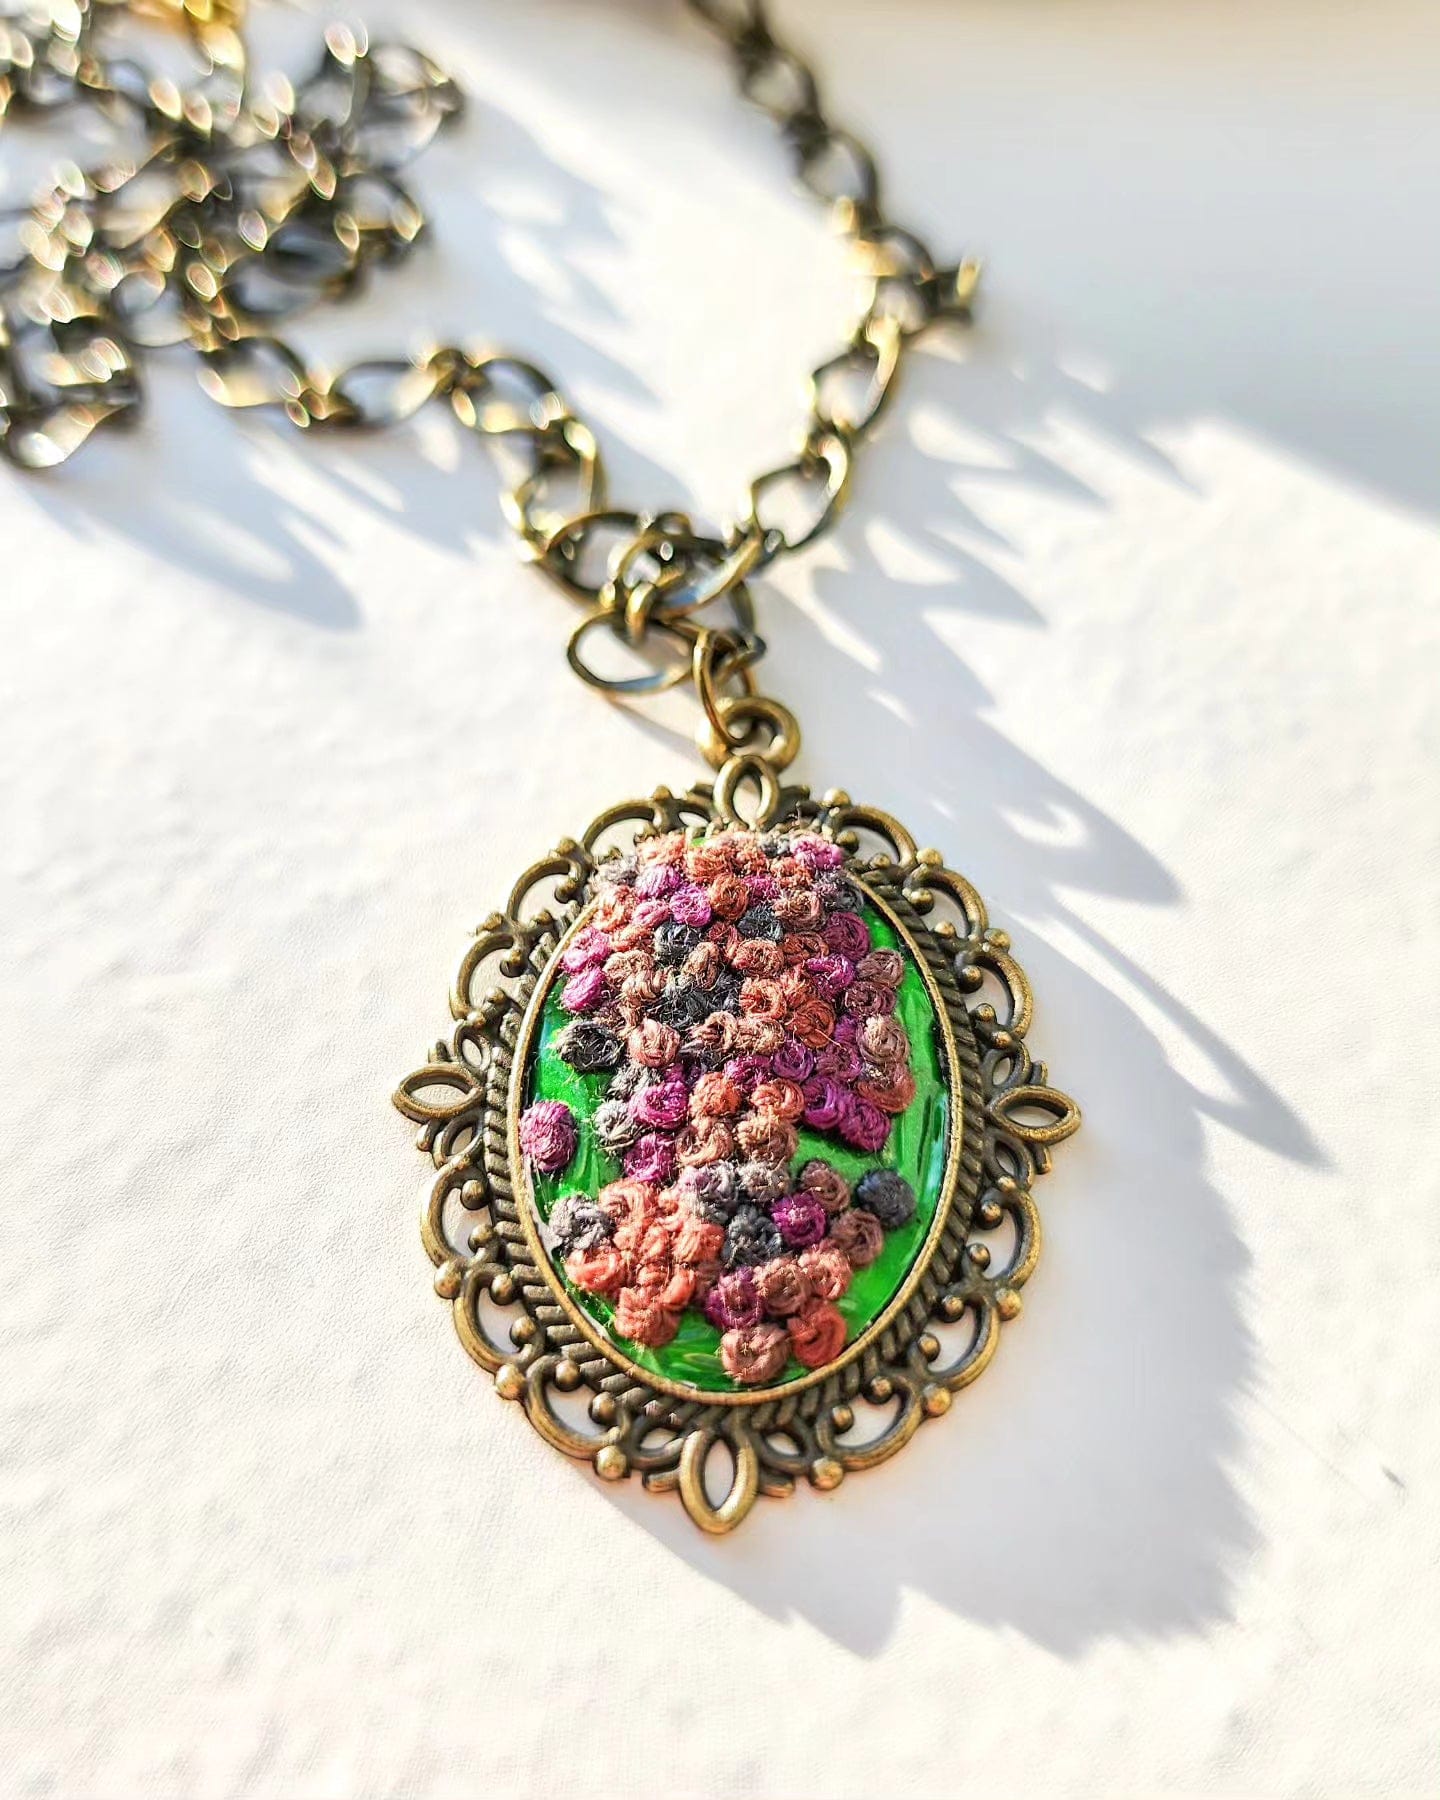 Embrace Embroidery Embroidered Necklace Hand Embroidered Mossy Terrain Pendant